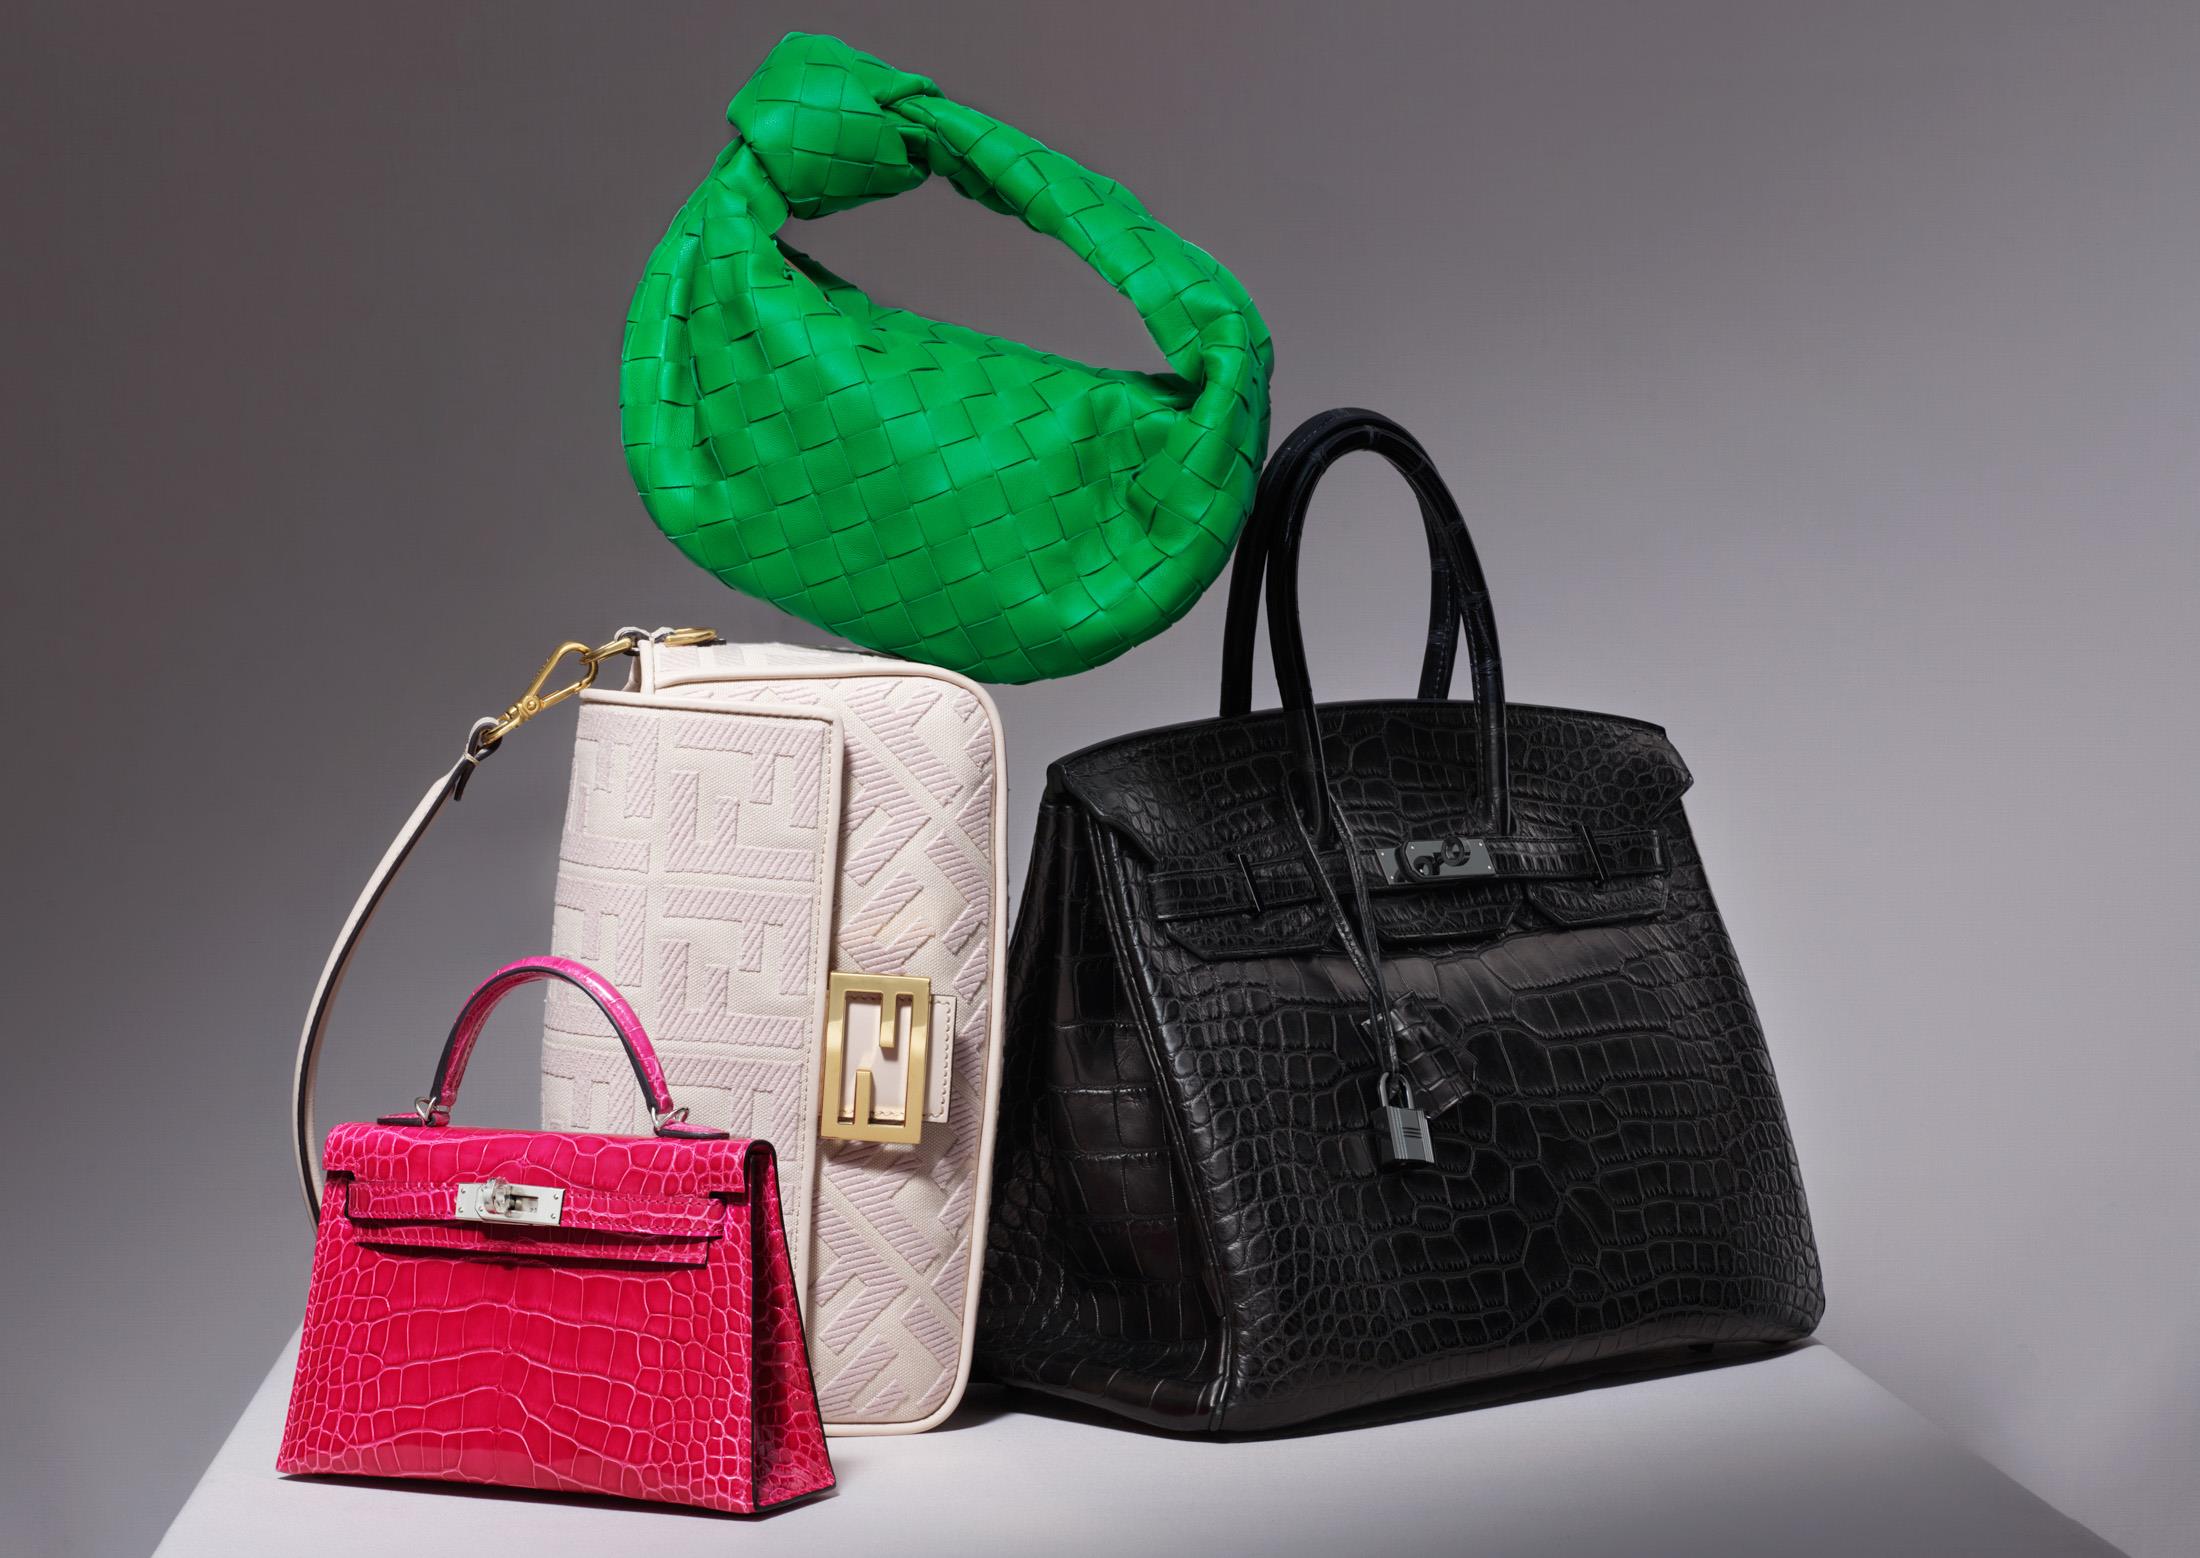 Luxury Bag Market Emerging Trends, Global Demand And Top Leading Brands ...